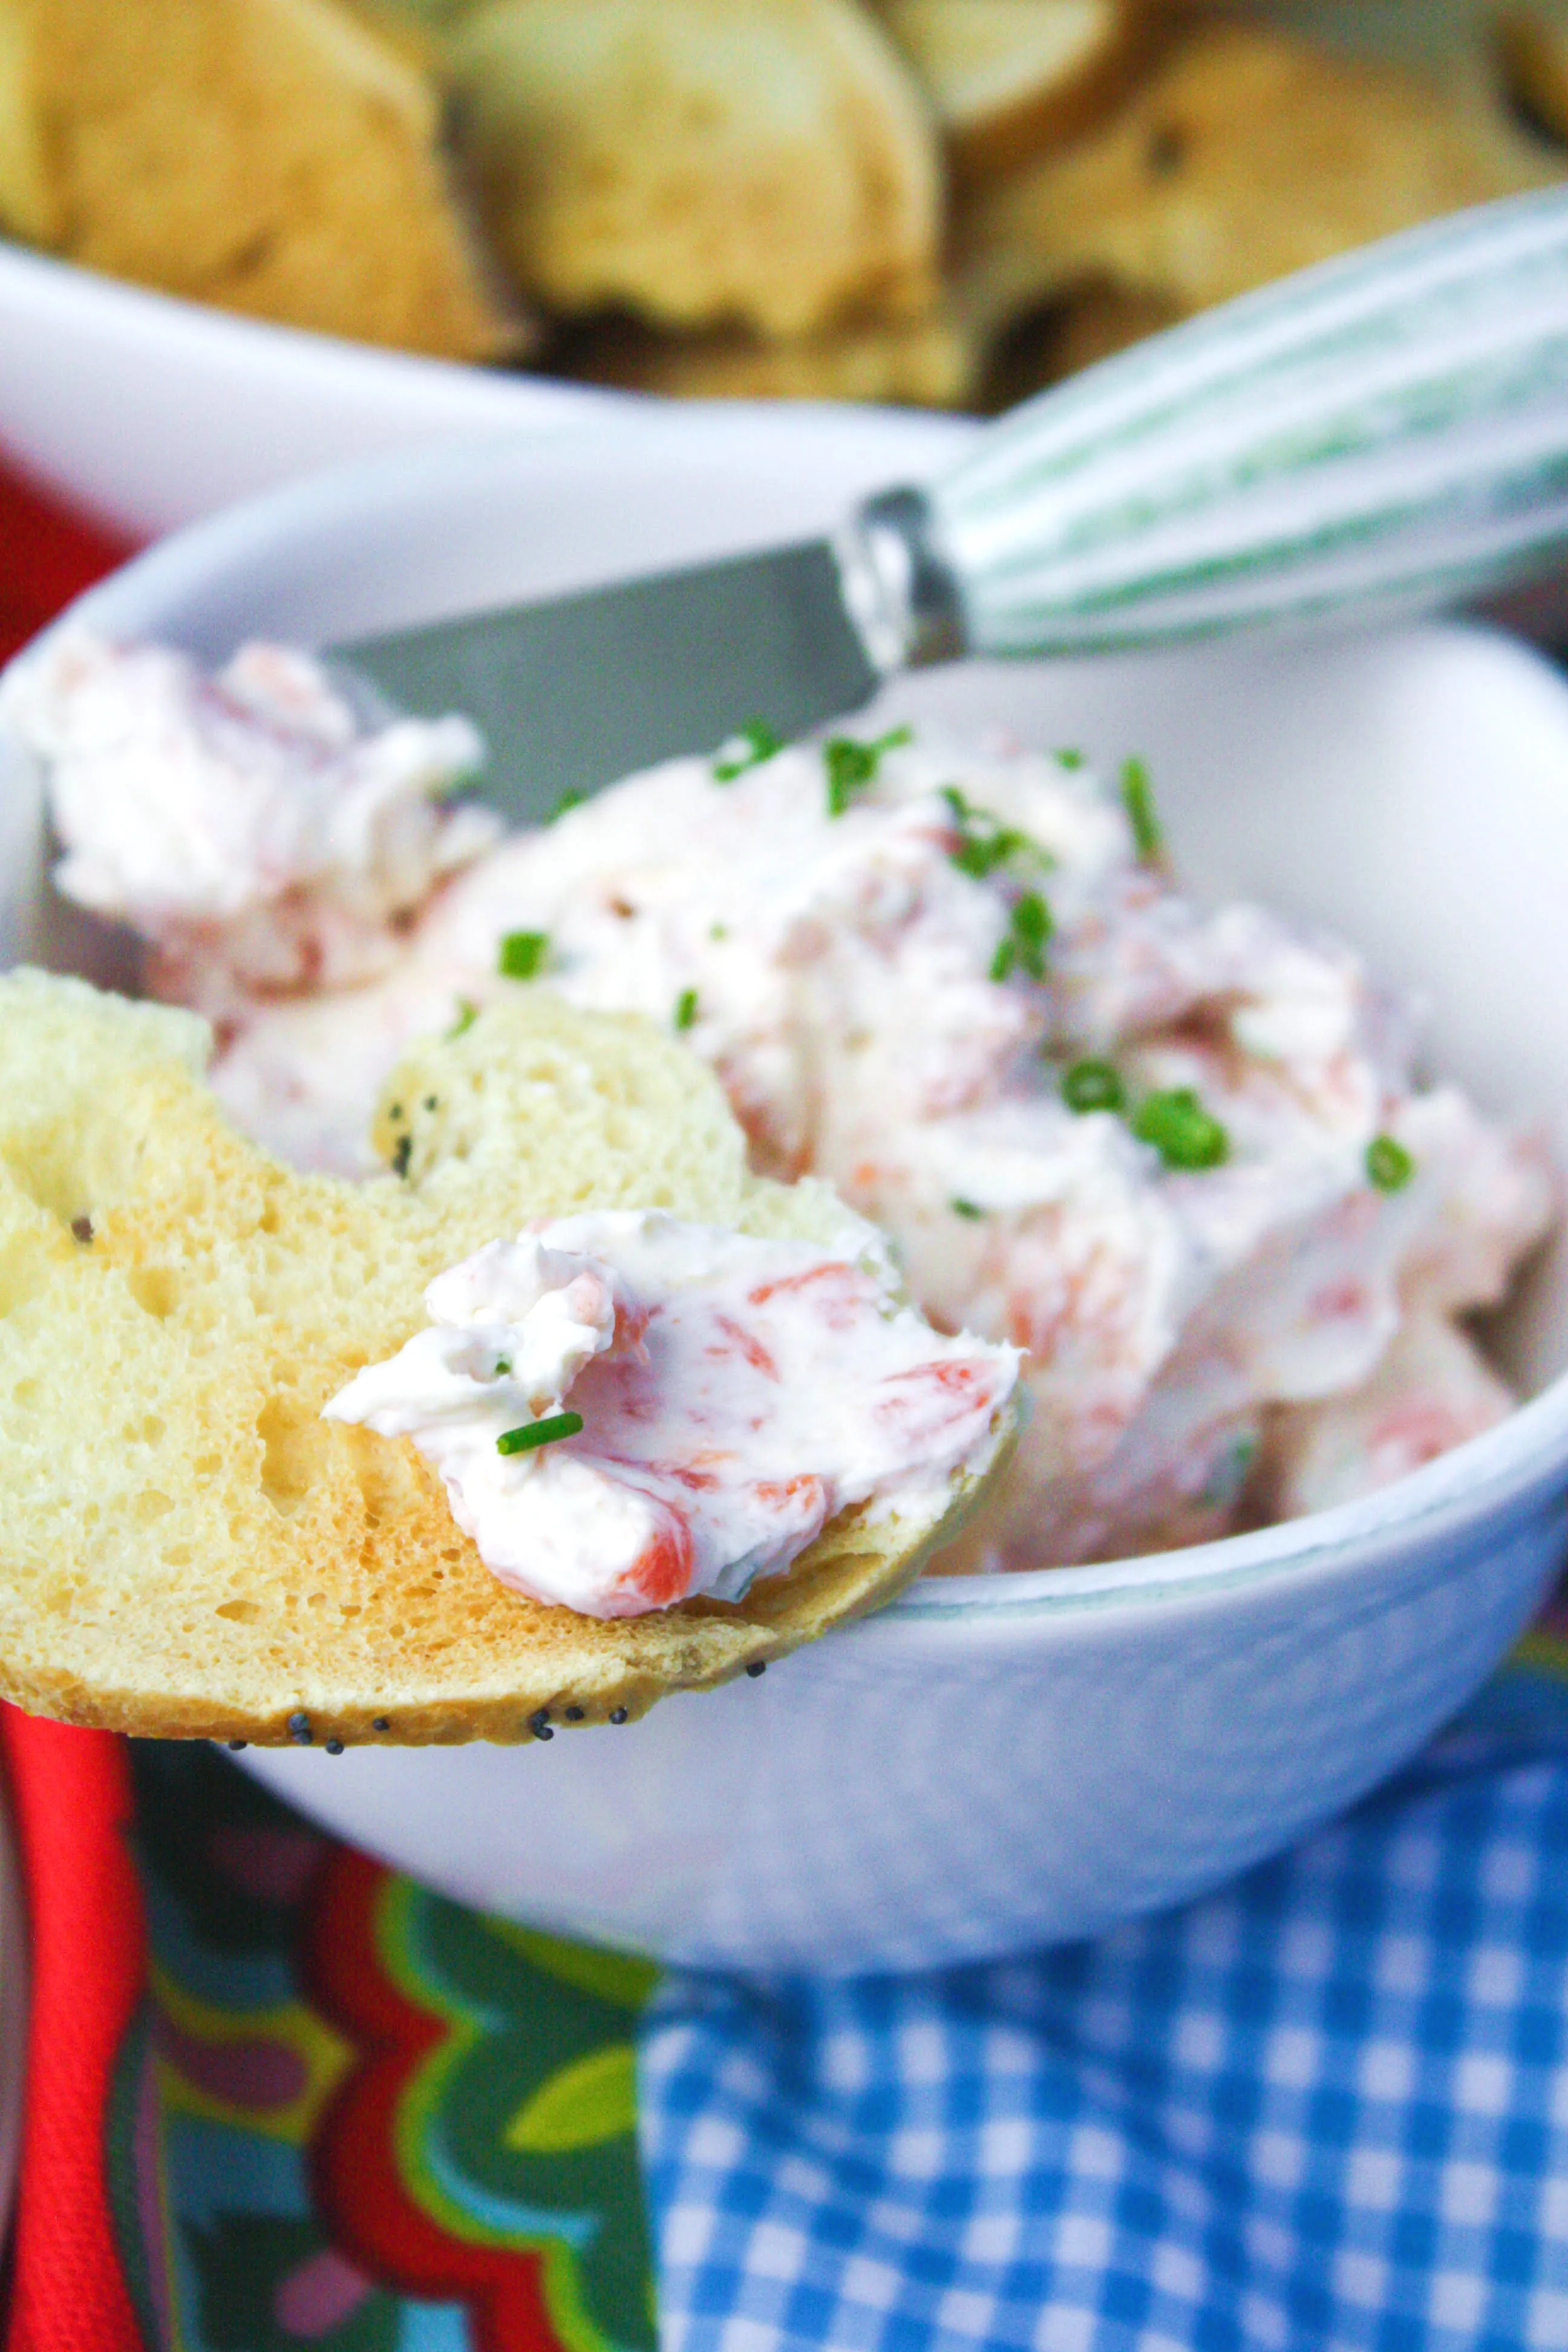 Simple Smoked Salmon Spread is a creamy appetizer you'll love to serve. This smoked salmon spread is so easy to make, too!